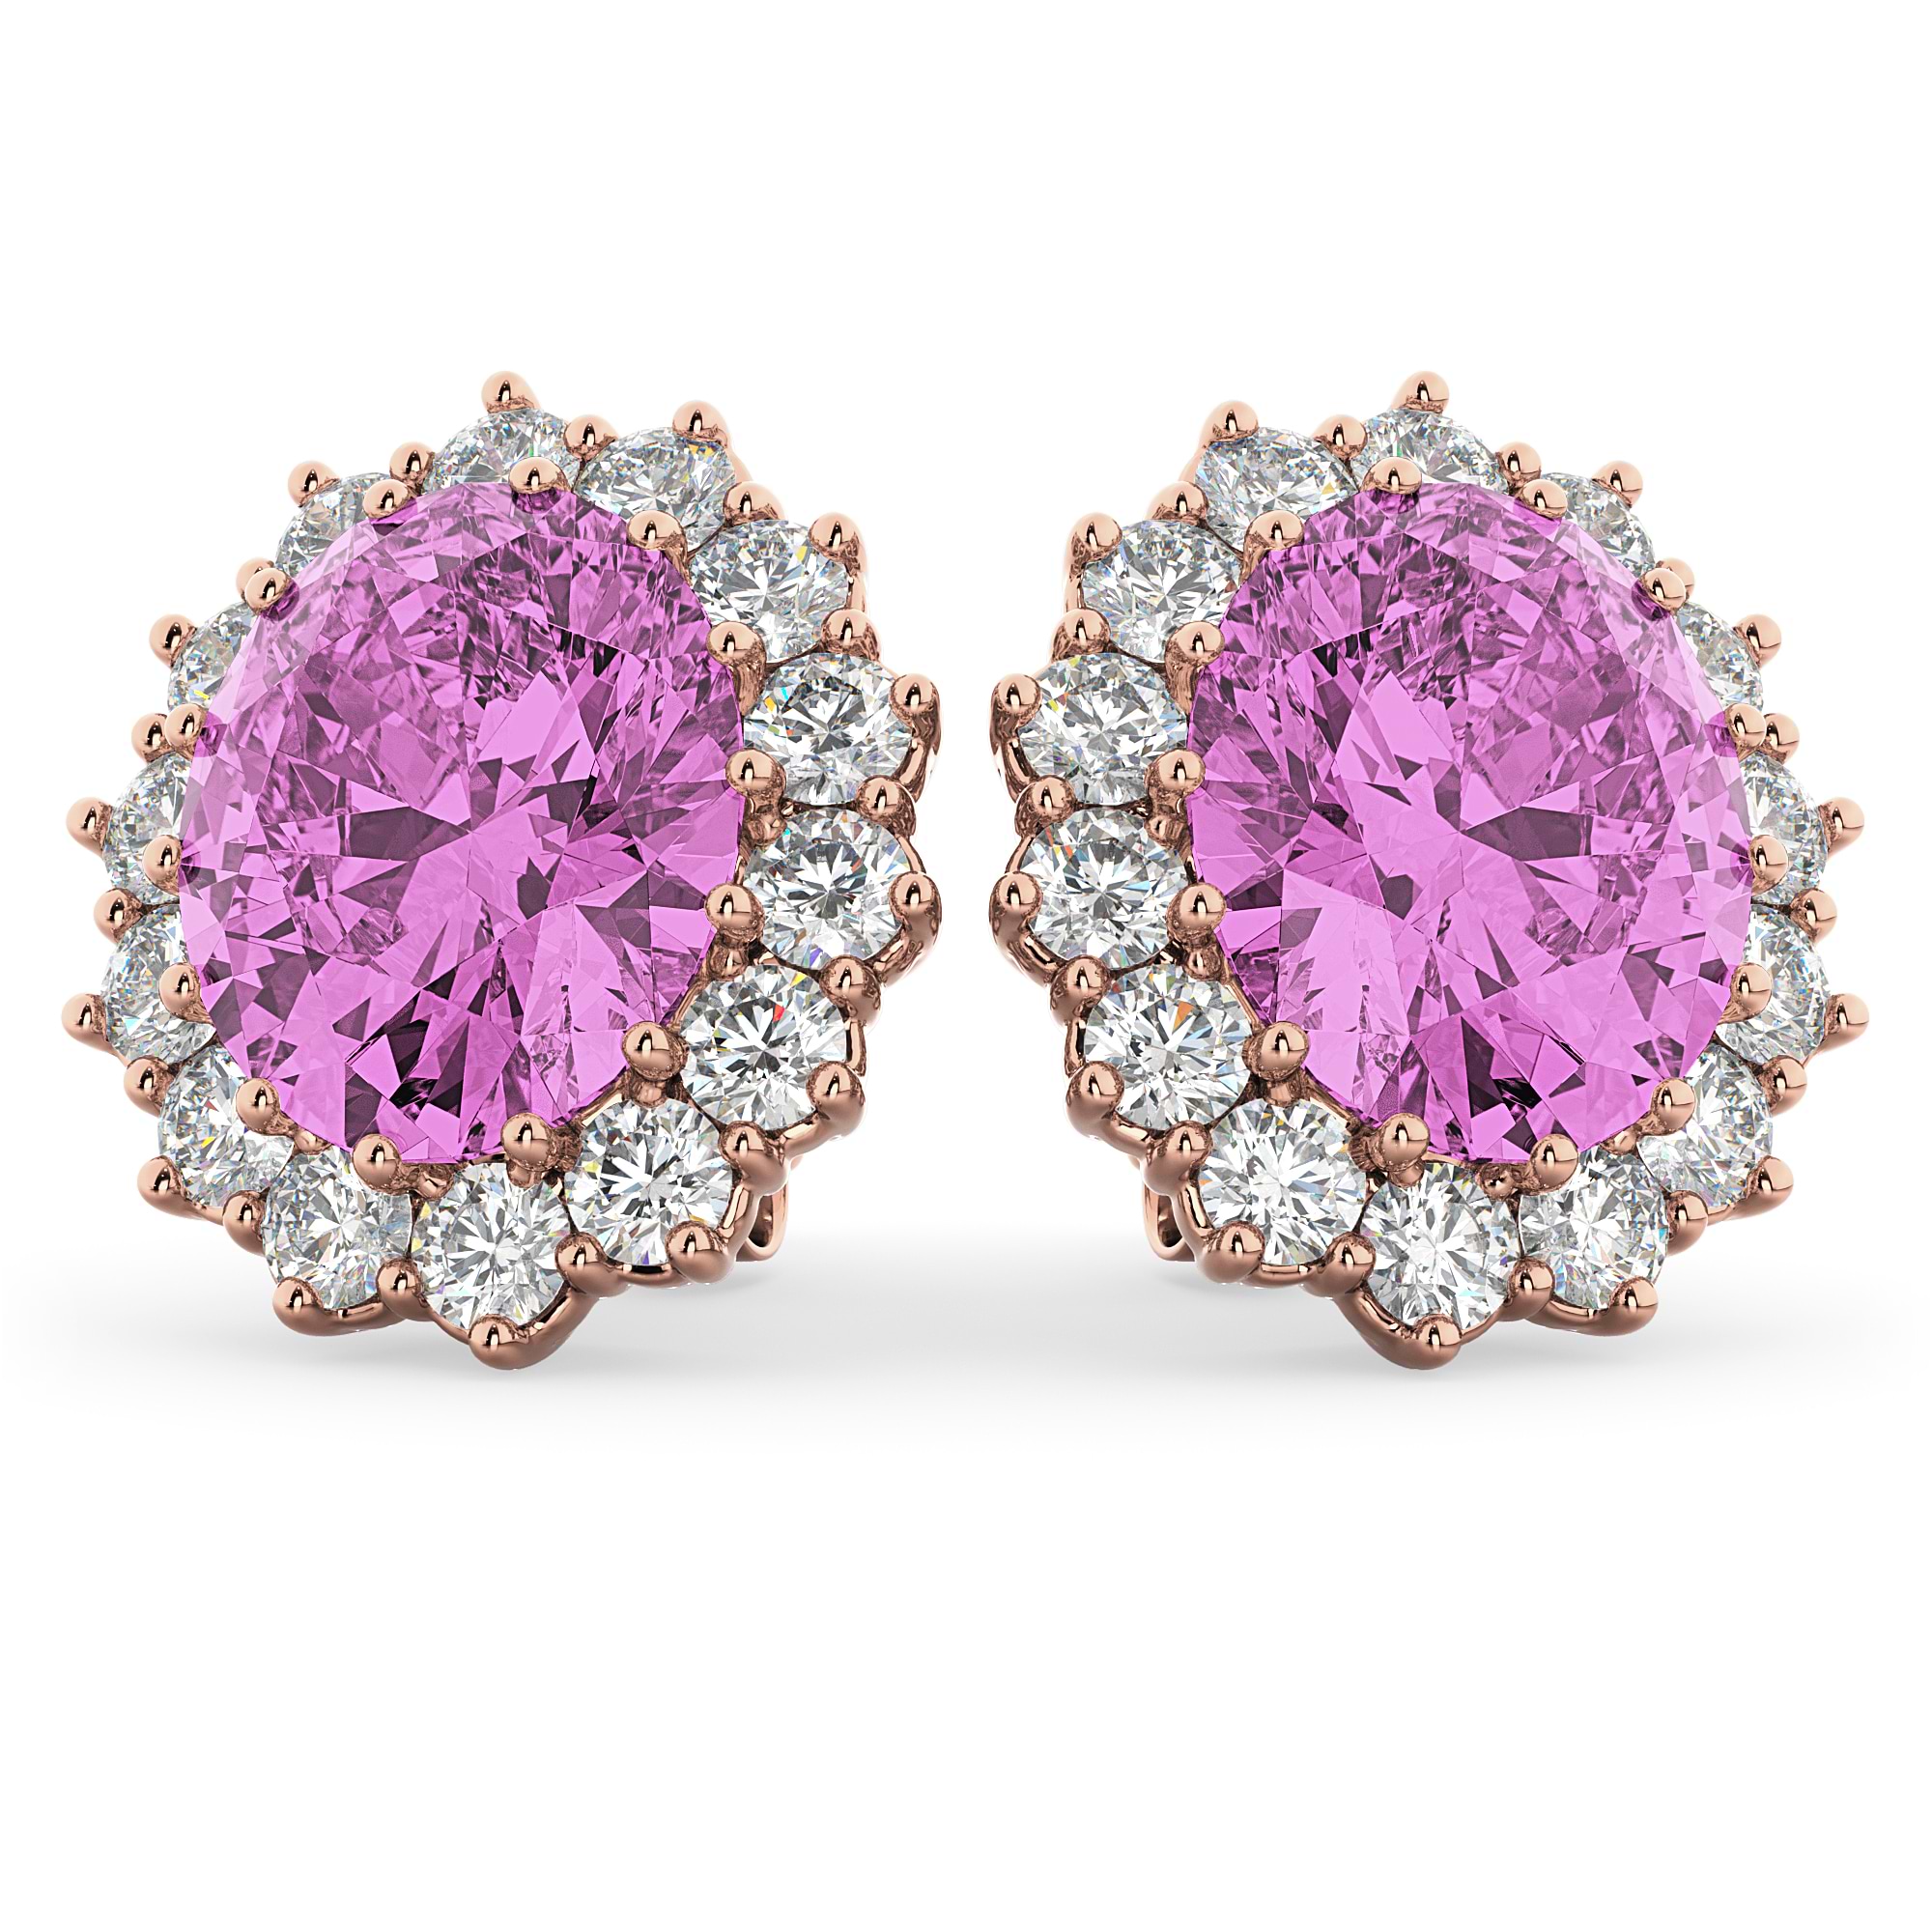 Oval Pink Sapphire & Diamond Accented Earrings 14k Rose Gold 10.80ctw